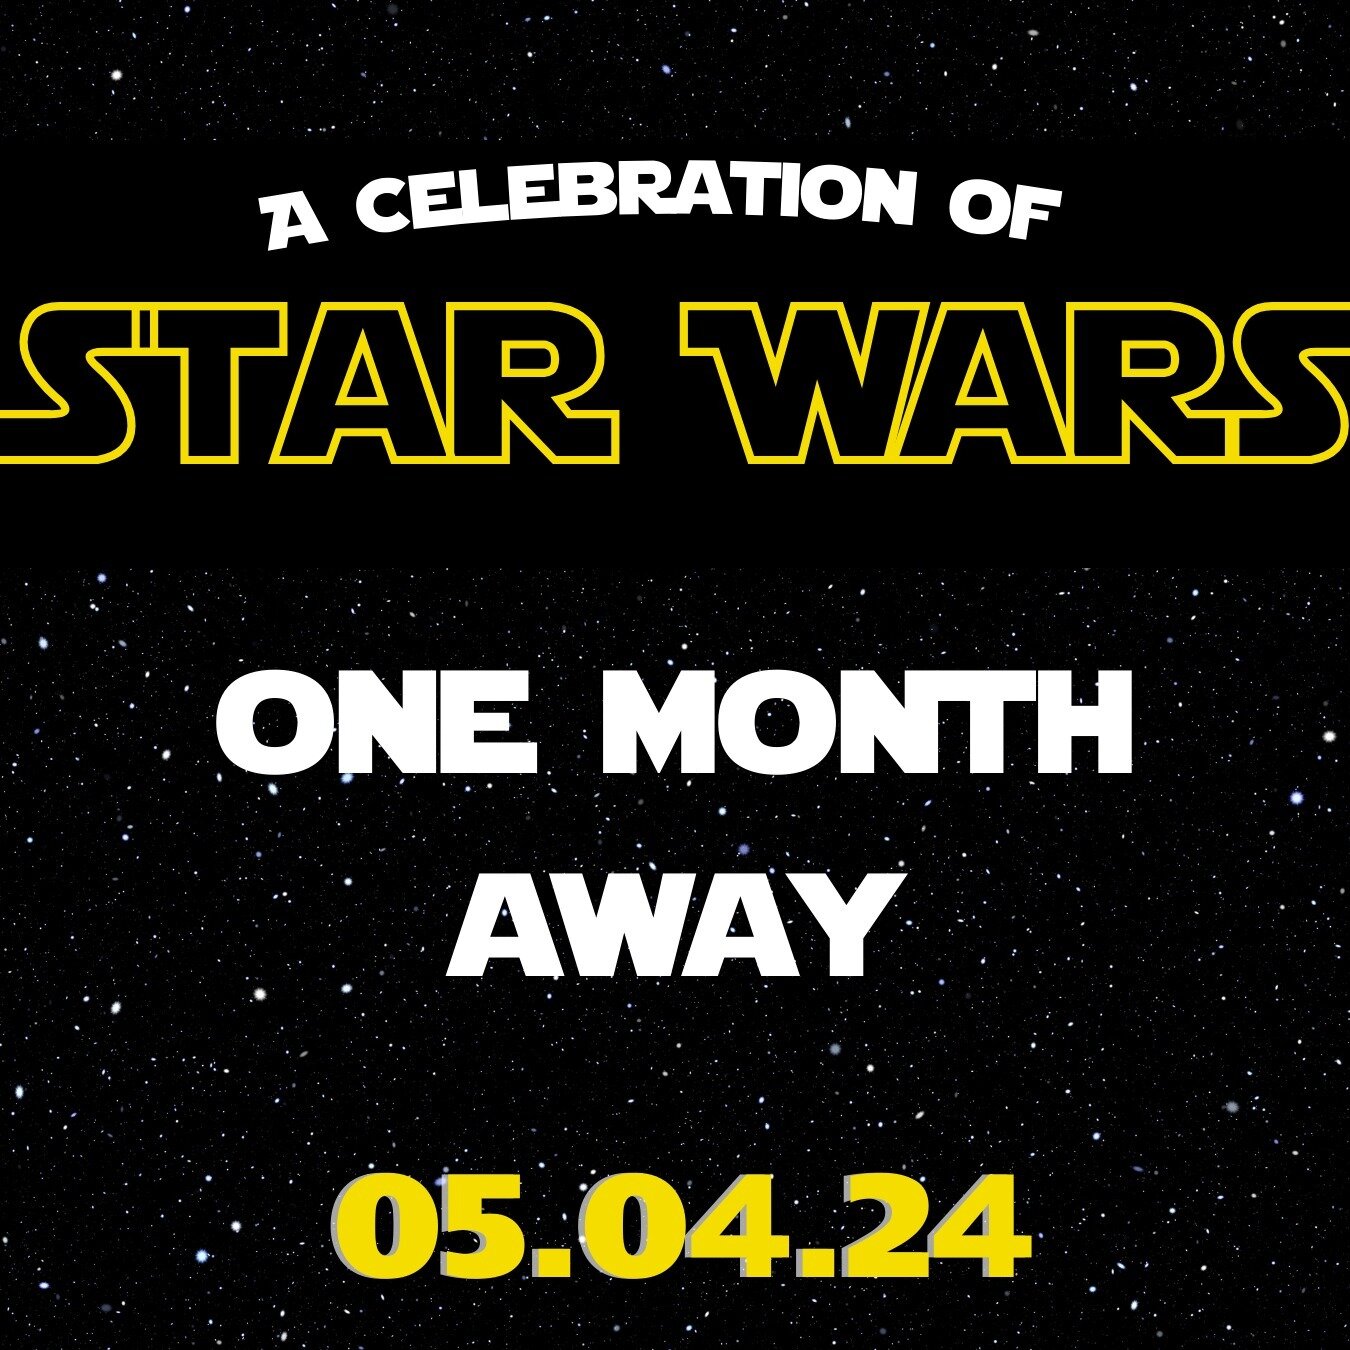 We are officially one month out from this year&rsquo;s conference! If you haven&rsquo;t registered yet make sure to do so, here: https://popcultureconference.com/24-star-wars-registration